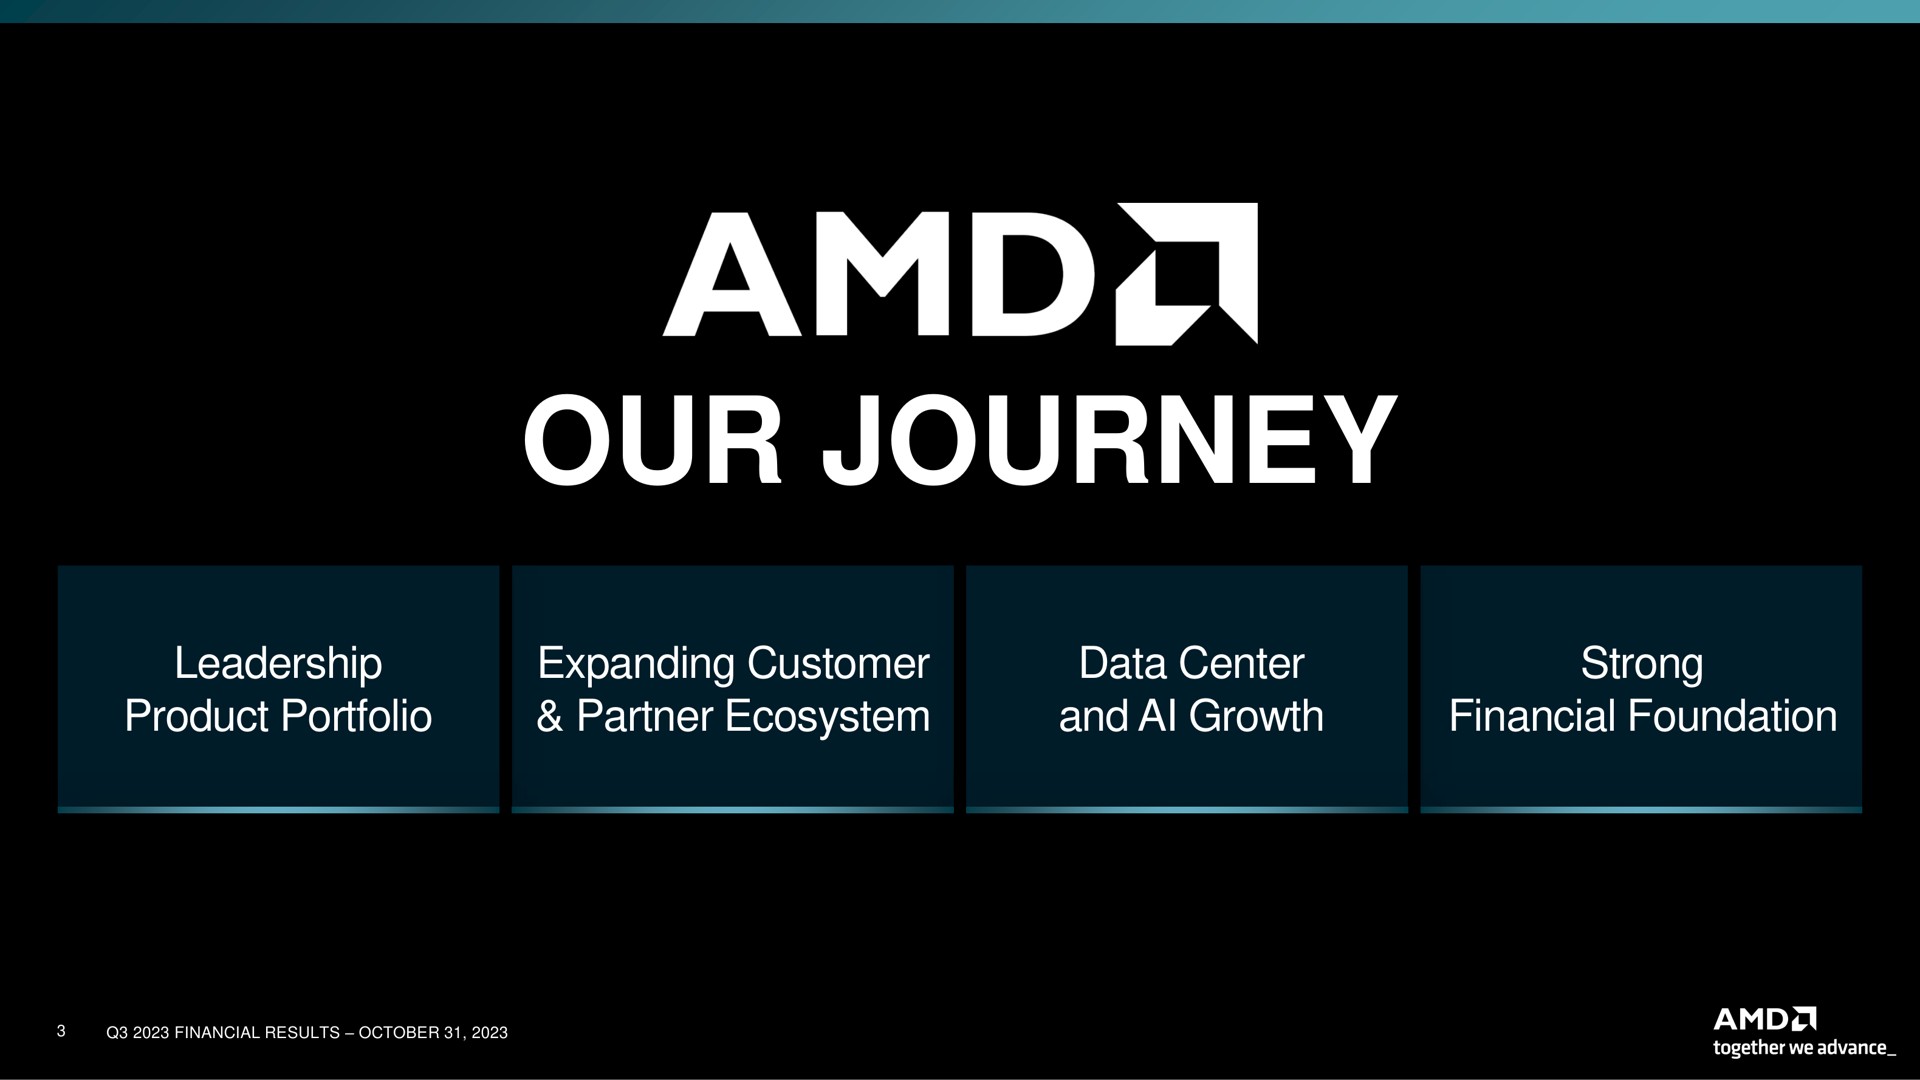 our journey leadership product portfolio expanding customer partner ecosystem data center and growth strong financial foundation a | AMD